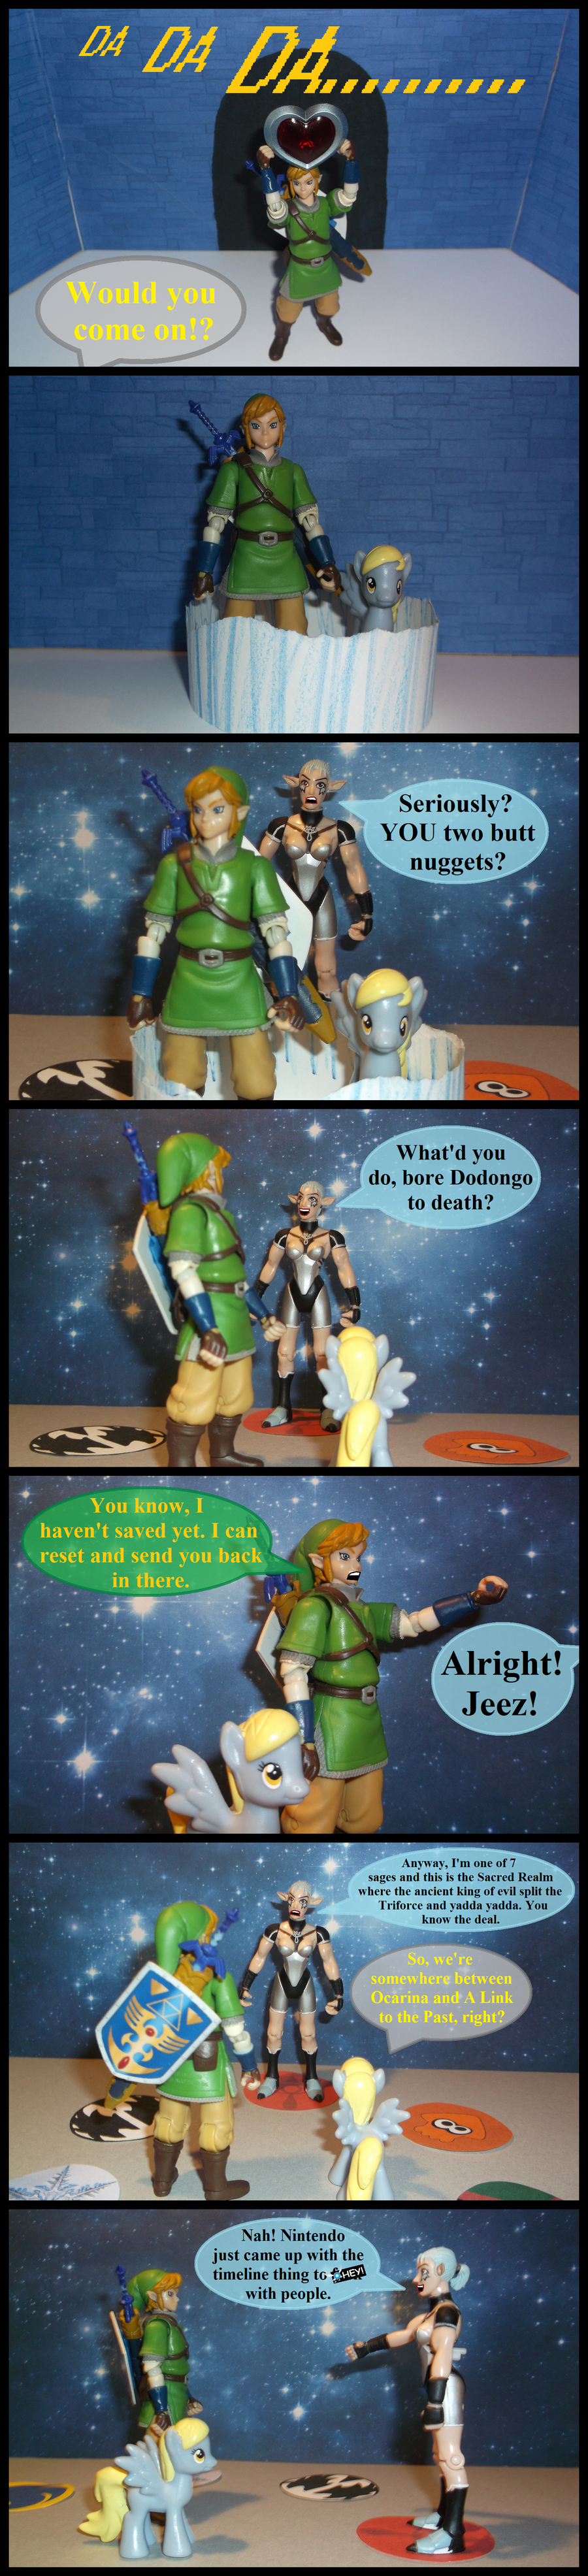 the_legend_of_zelda__pain_in_the_ass__pt__36__by_therockinstallion-d9vlix8.png